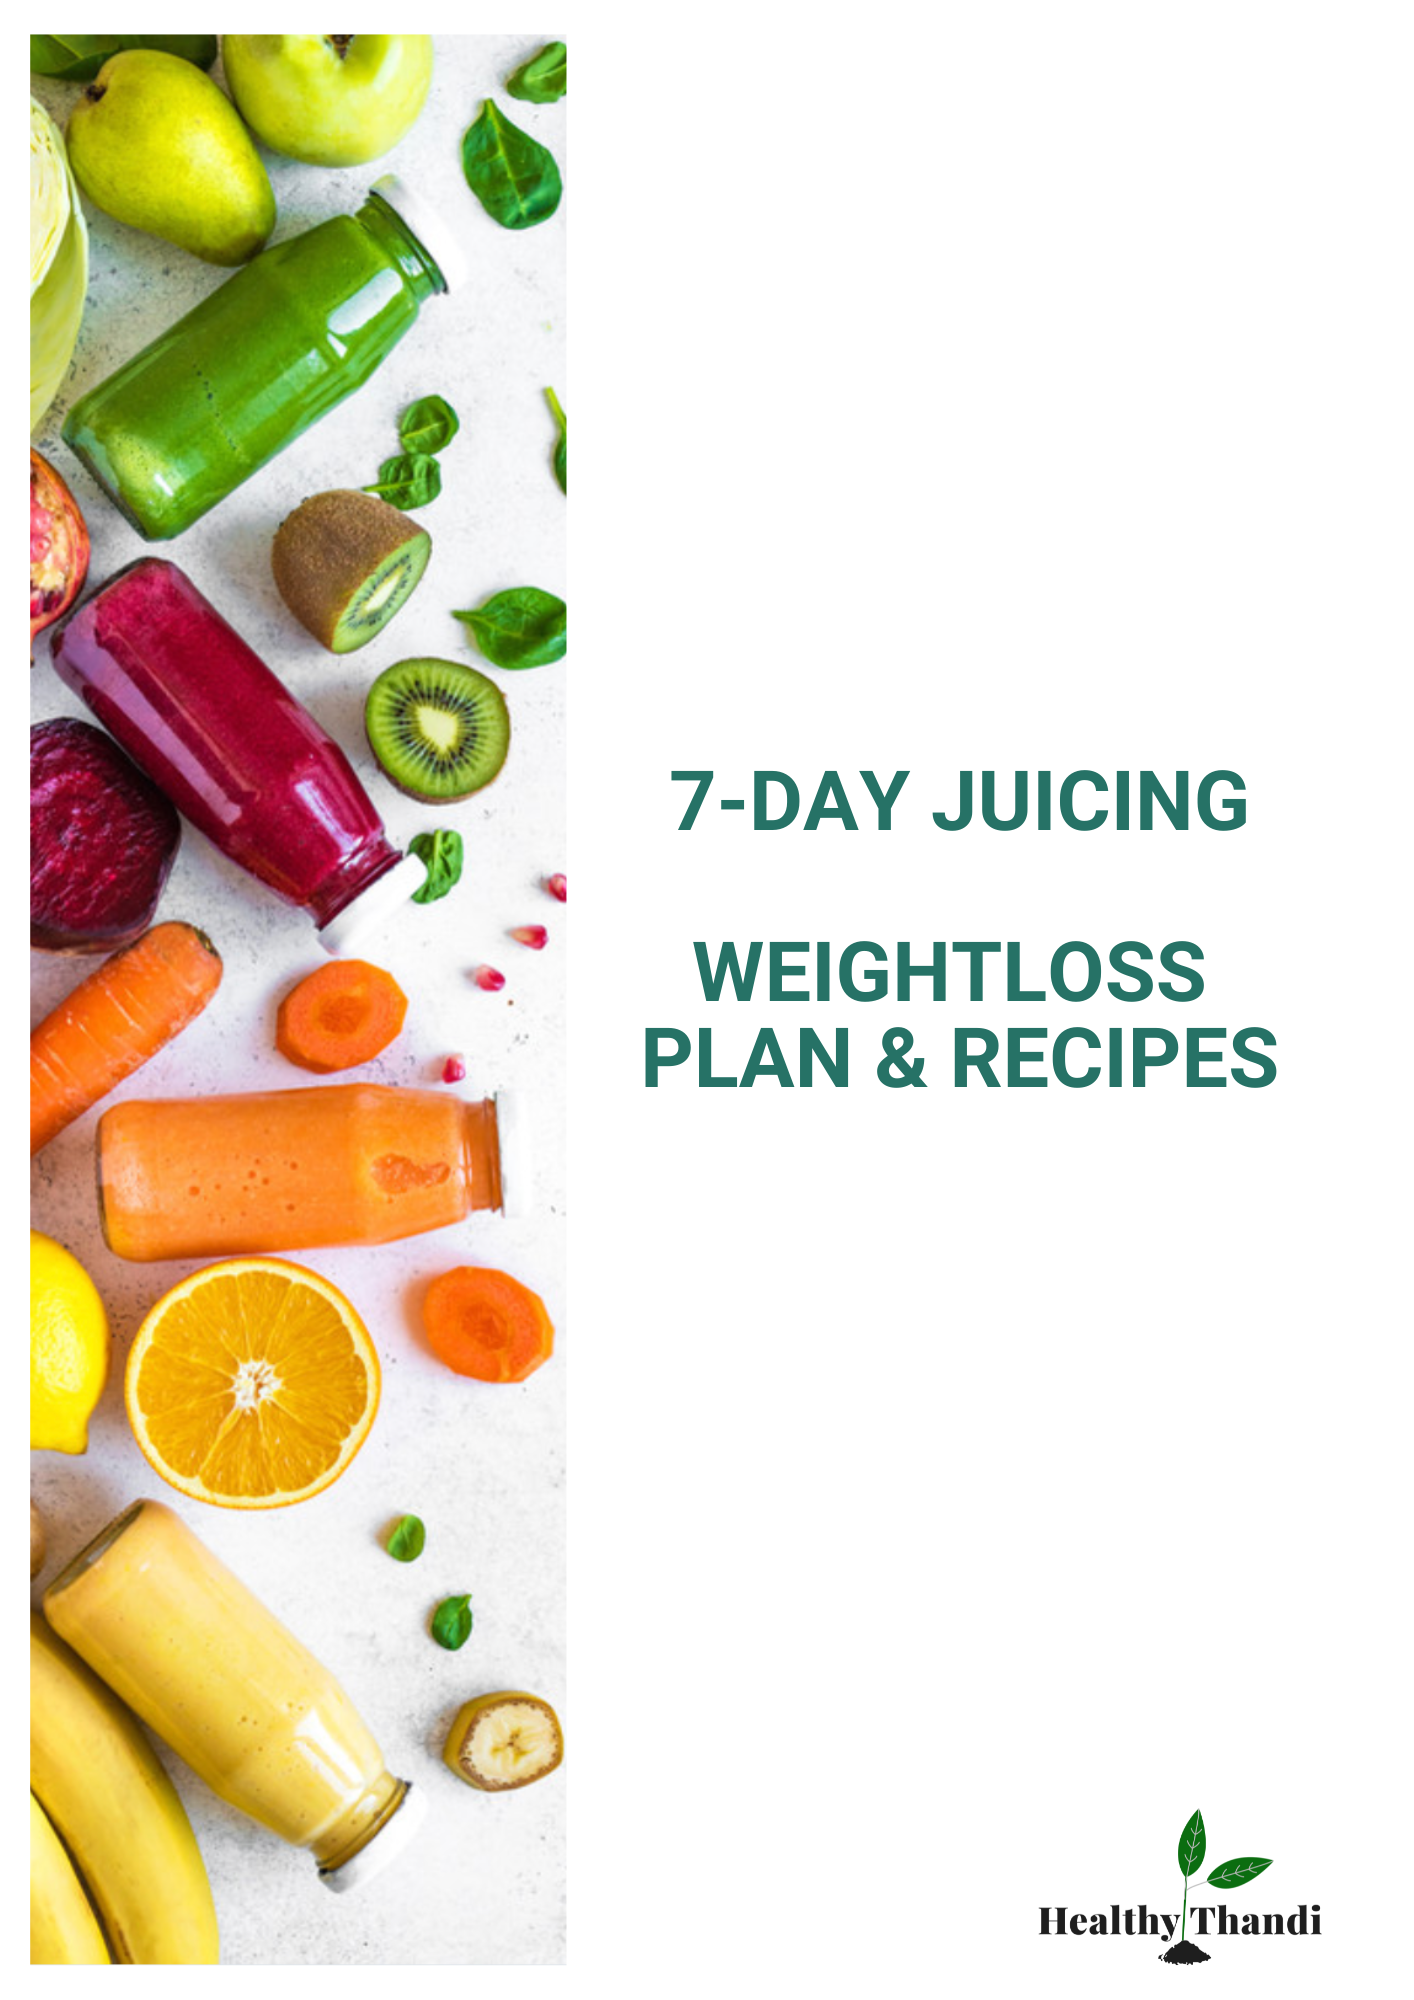 7 Days Juicing Fasting Weight Loss Plan